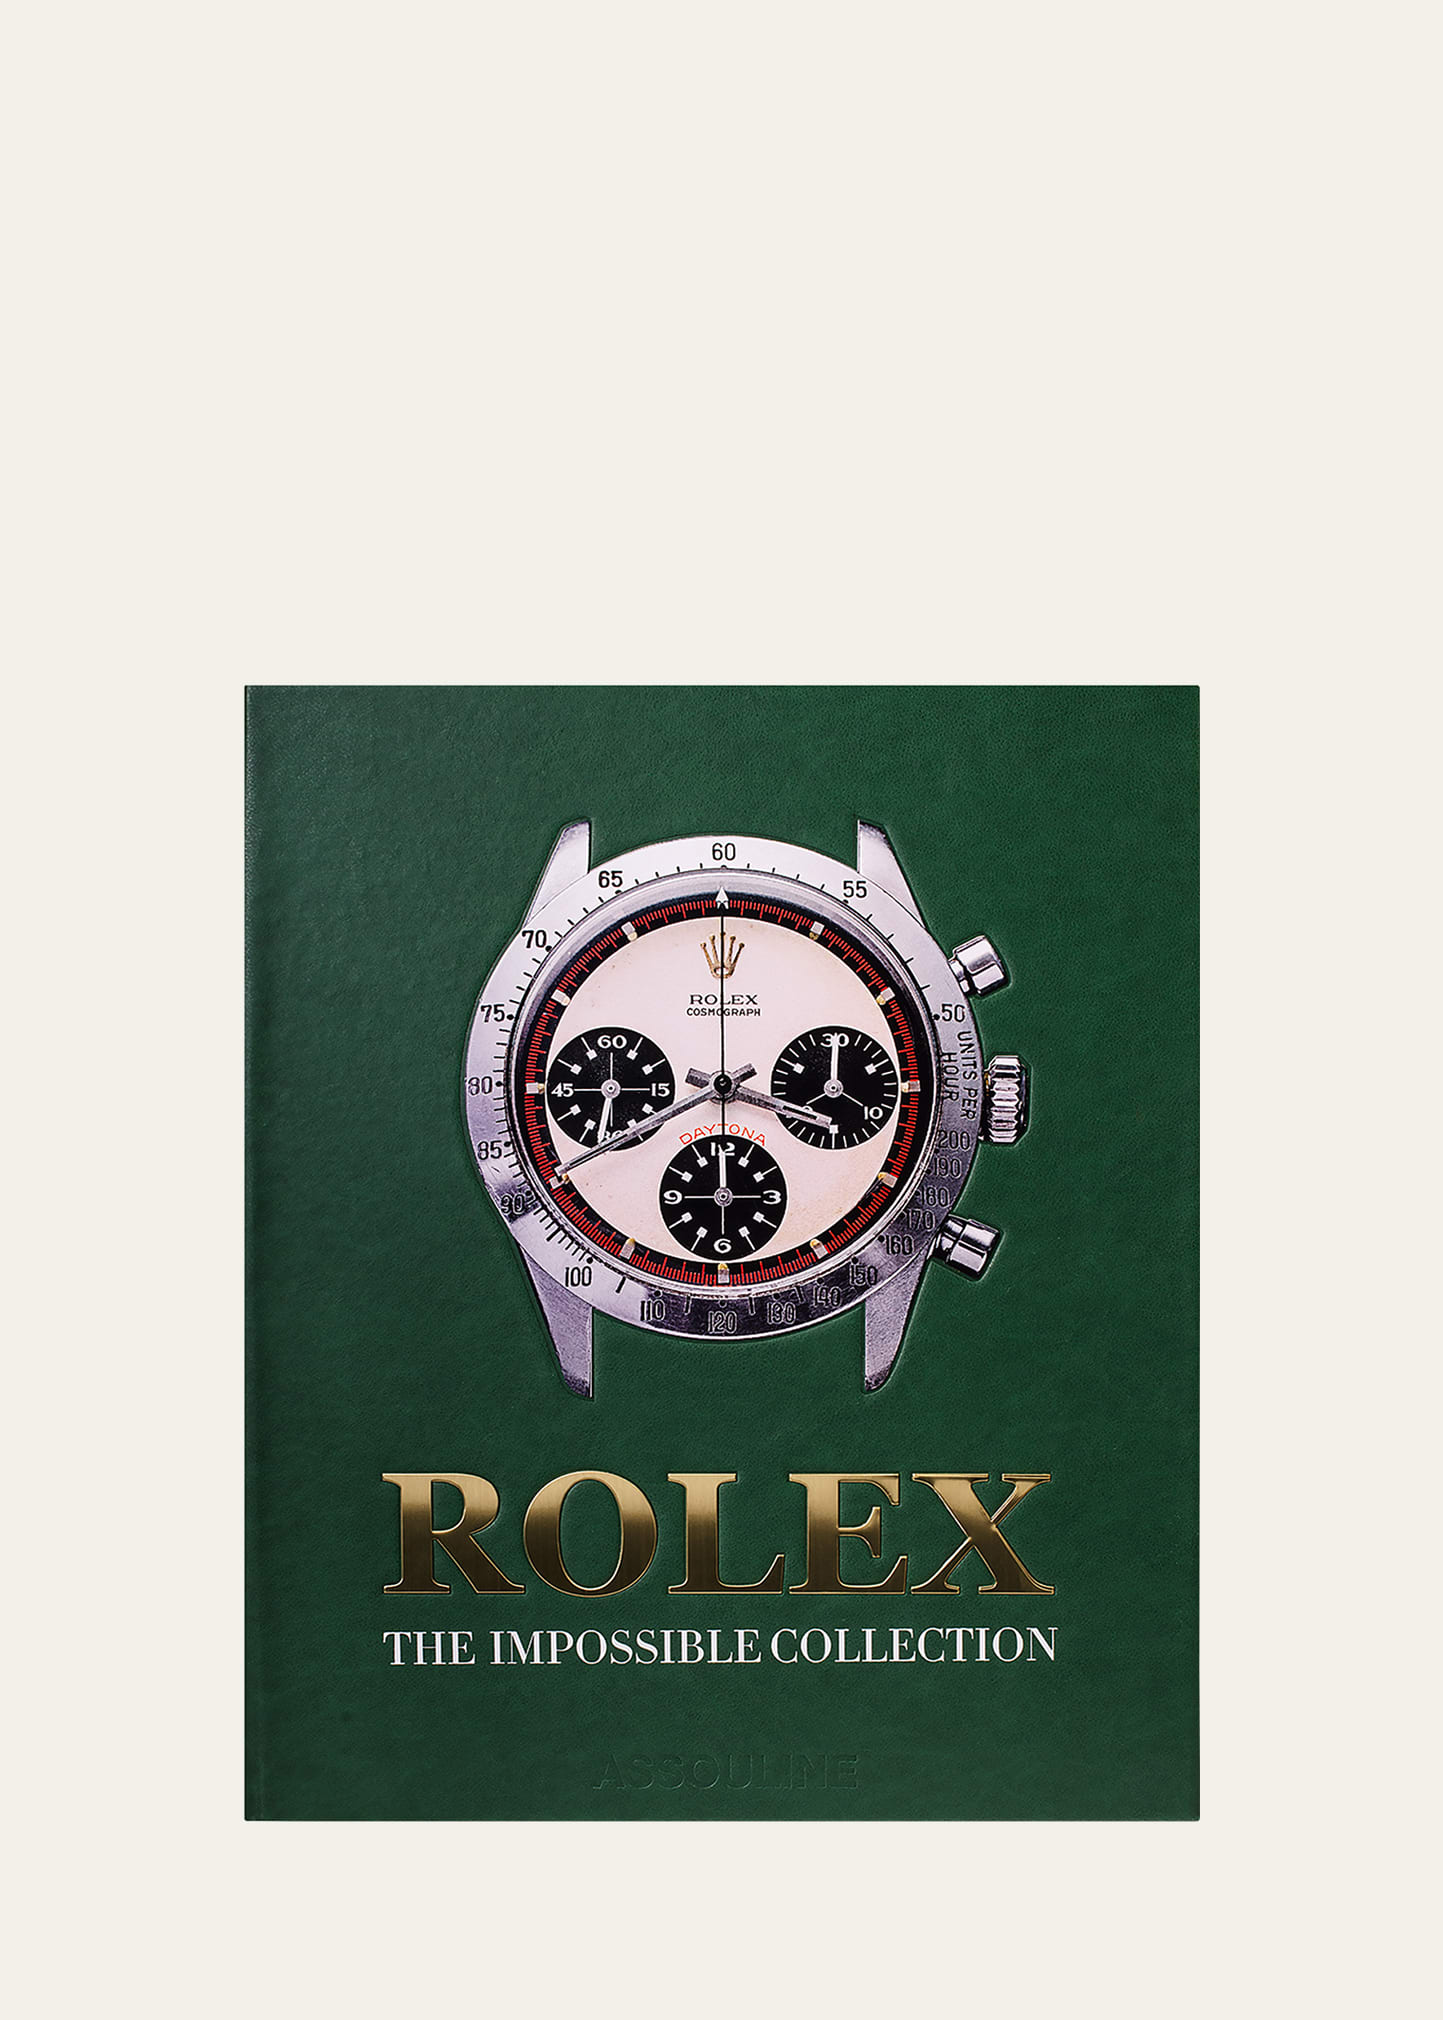 "Rolex: The Impossible Collection" Book by Fabienne Reybaud